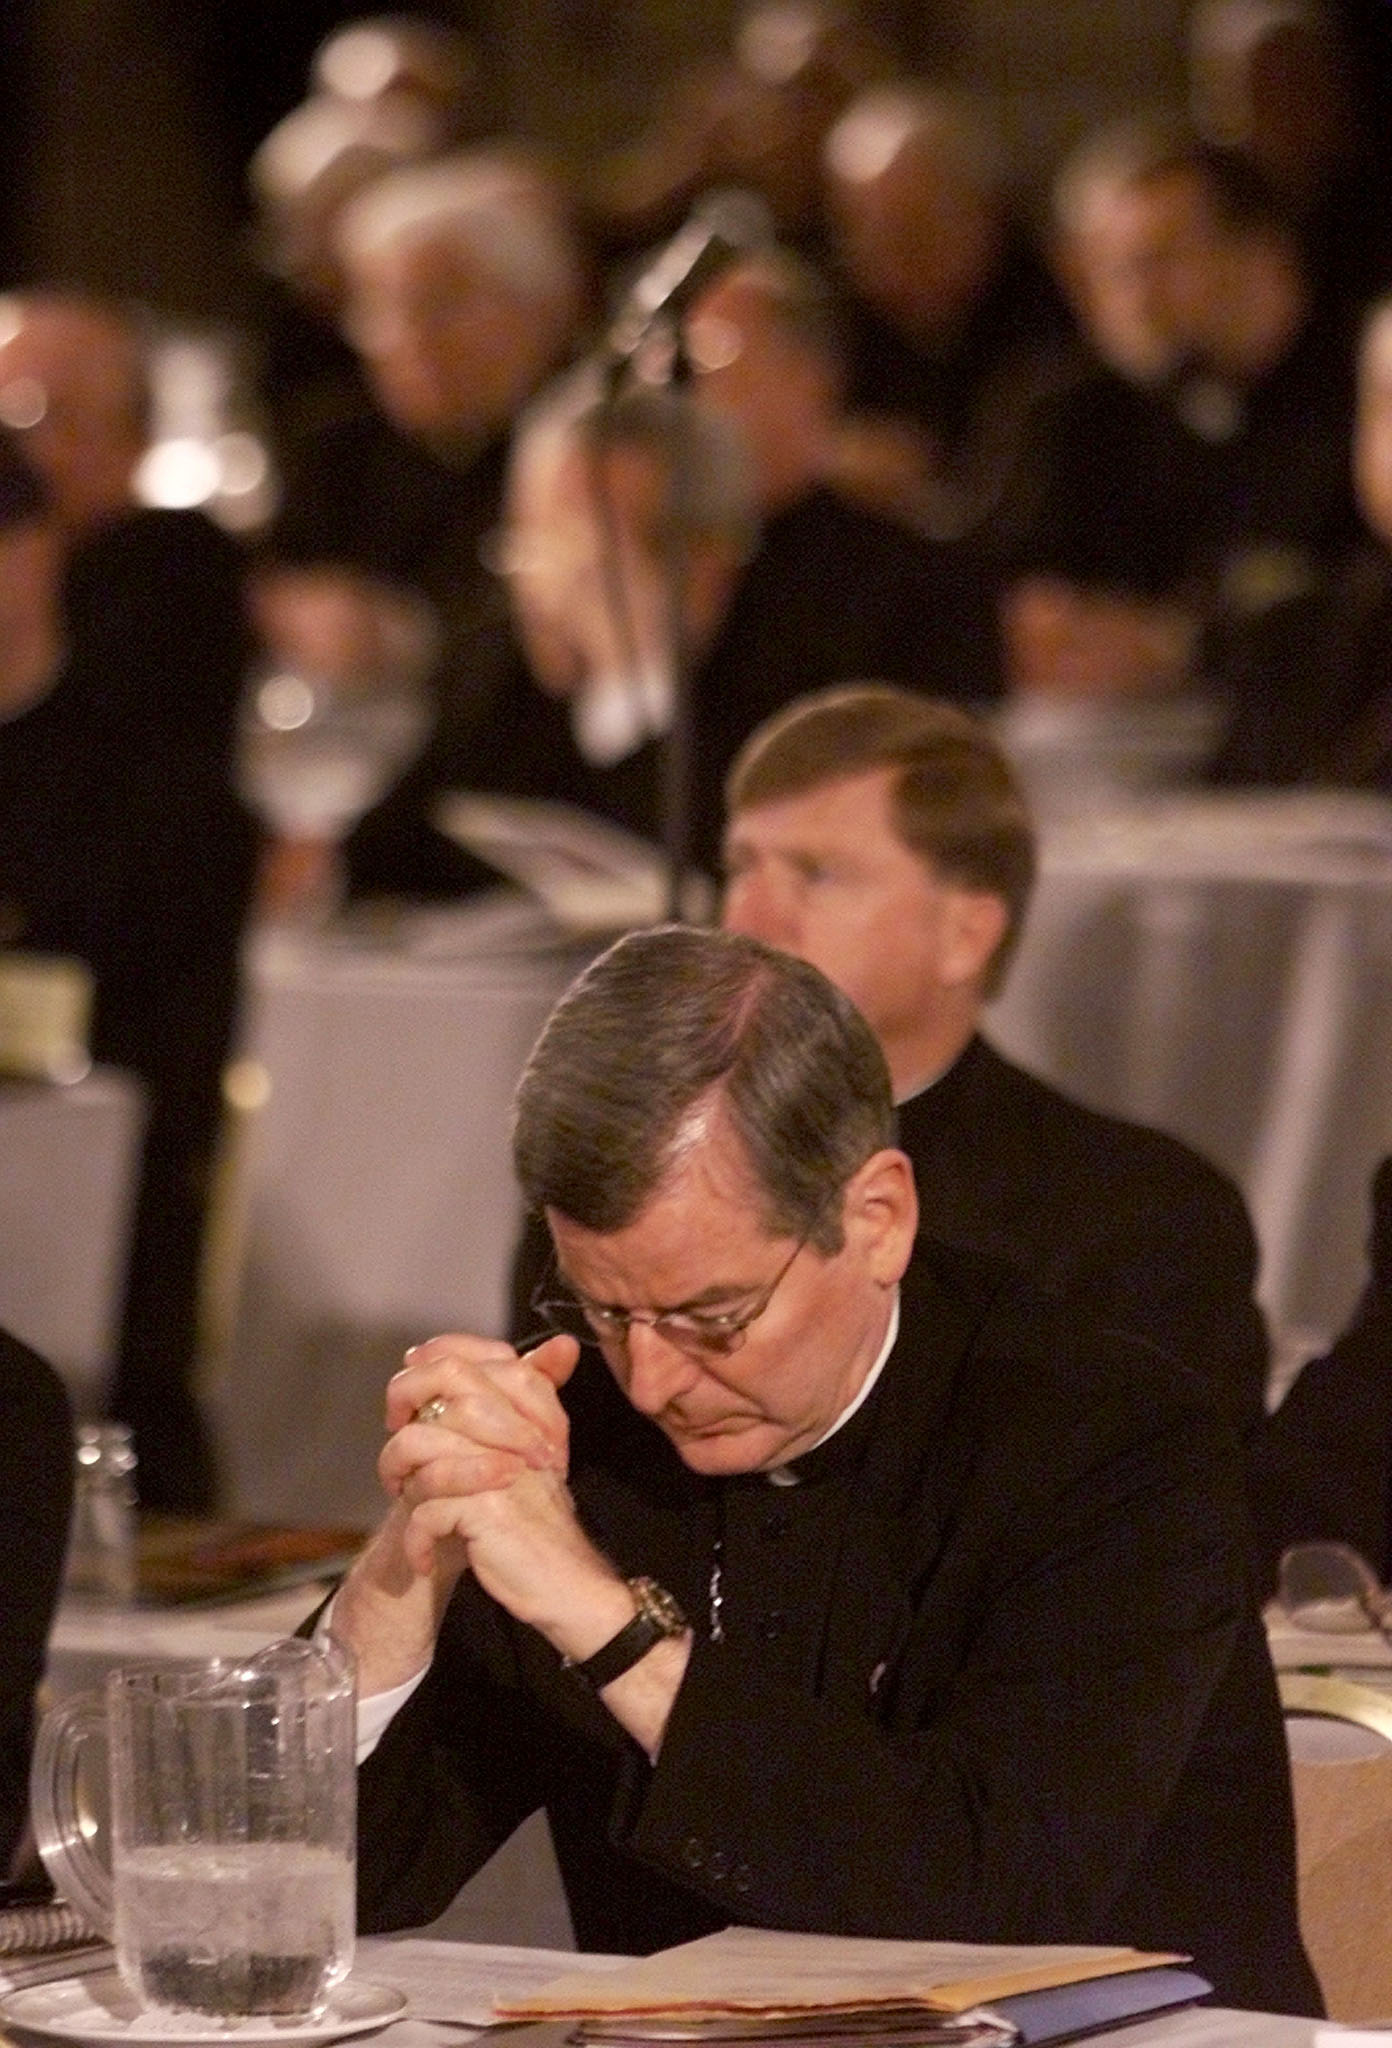 Bishop John C. Nienstedt, from New Ulm, Minnesota, listens to opening remarks during the first day of the United States Conference of Catholic Bishops in Dallas, Texas, June, 13, 2002. U.S. Catholic bishops are close to adopting a "zero tolerance" policy that would defrock any priest who ever sexually molested a minor, a U.S. bishop said Thursday, reflecting a tough stance in the face of mounting public outrage at sex abuse in the church. REUTERS/Rick Wilking